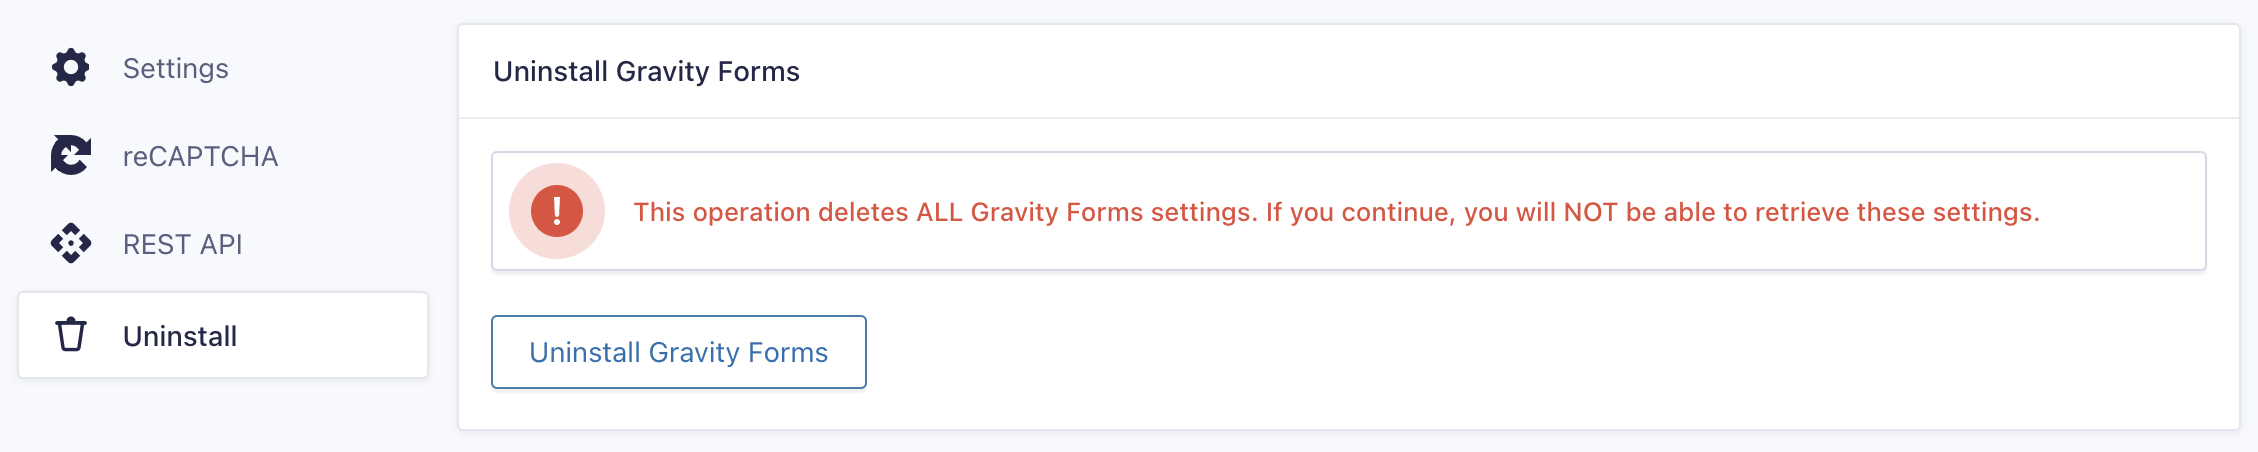 Image showing Uninstall Settings for Gravity Forms